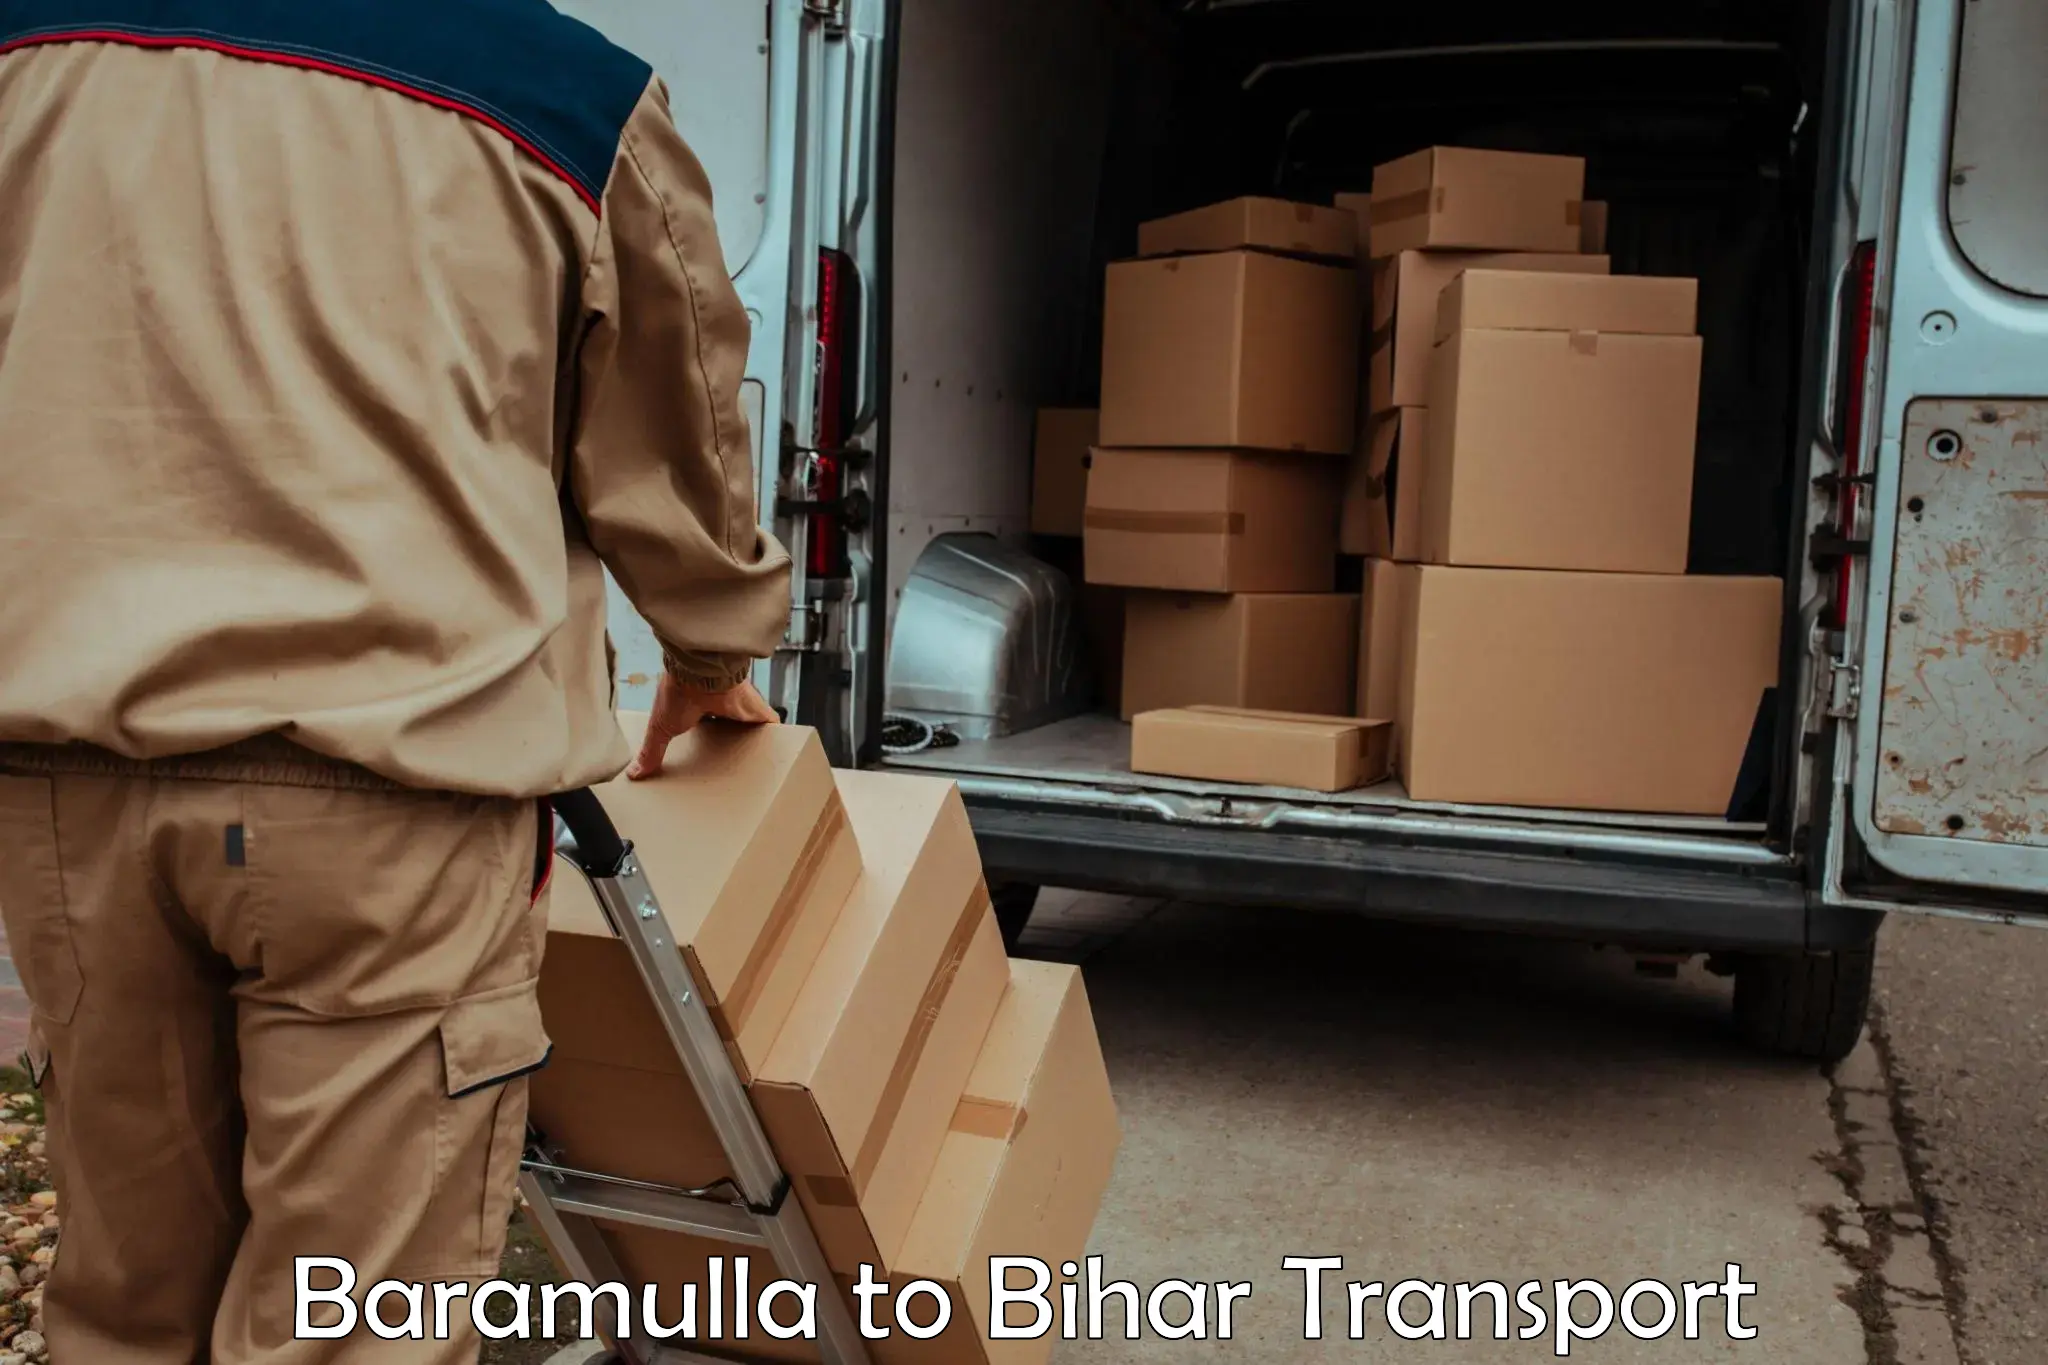 Part load transport service in India Baramulla to Mairwa